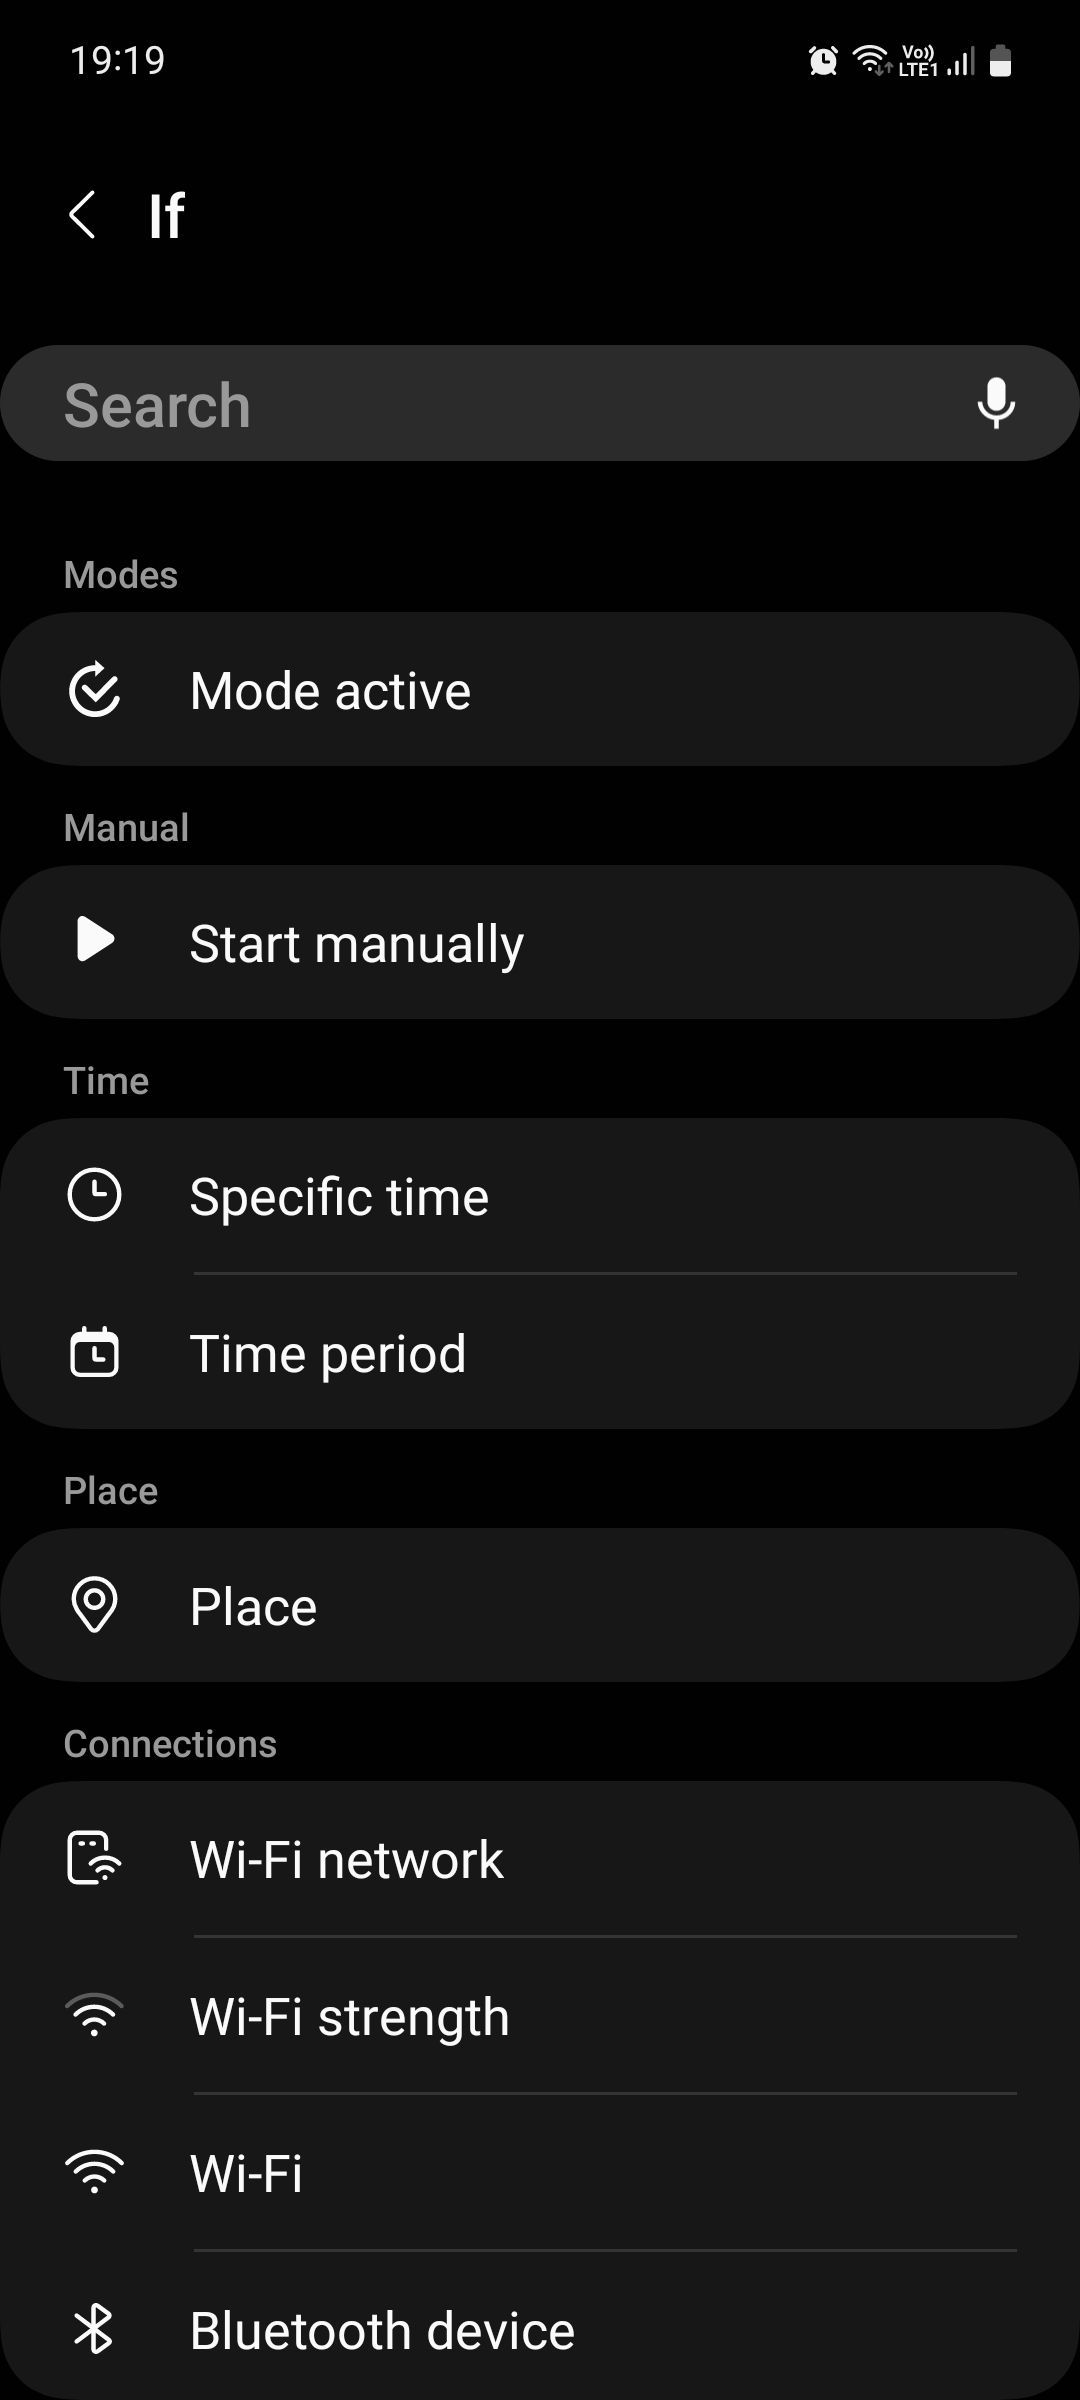 Samsung Modes and Routines If commands